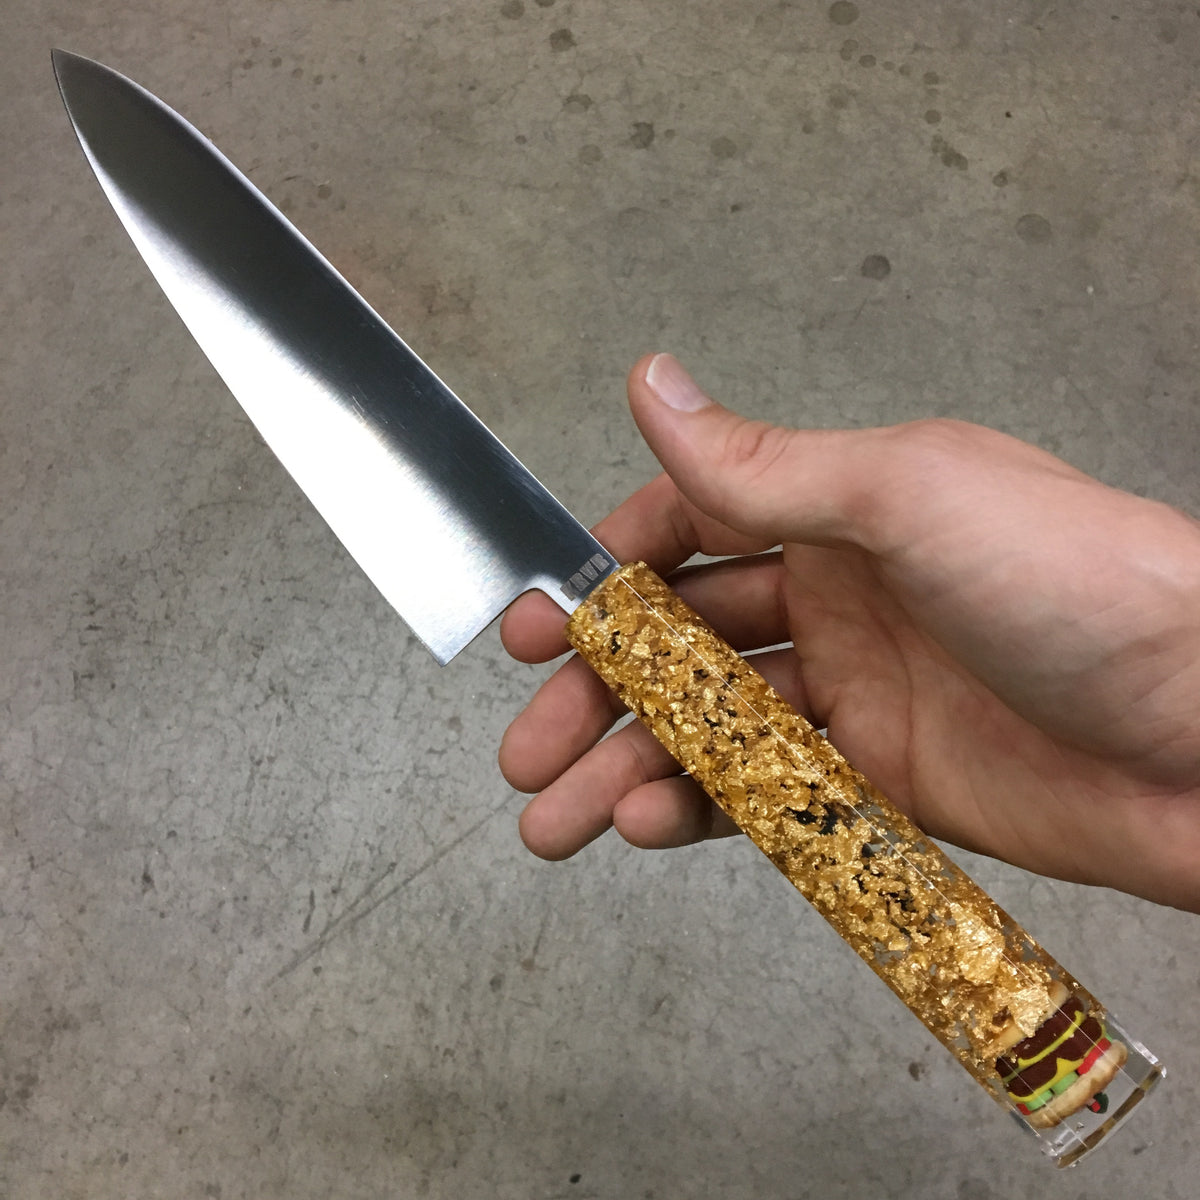 Cheeseburger in Paradise - 210mm (8.25in) Gyuto Chef Knife